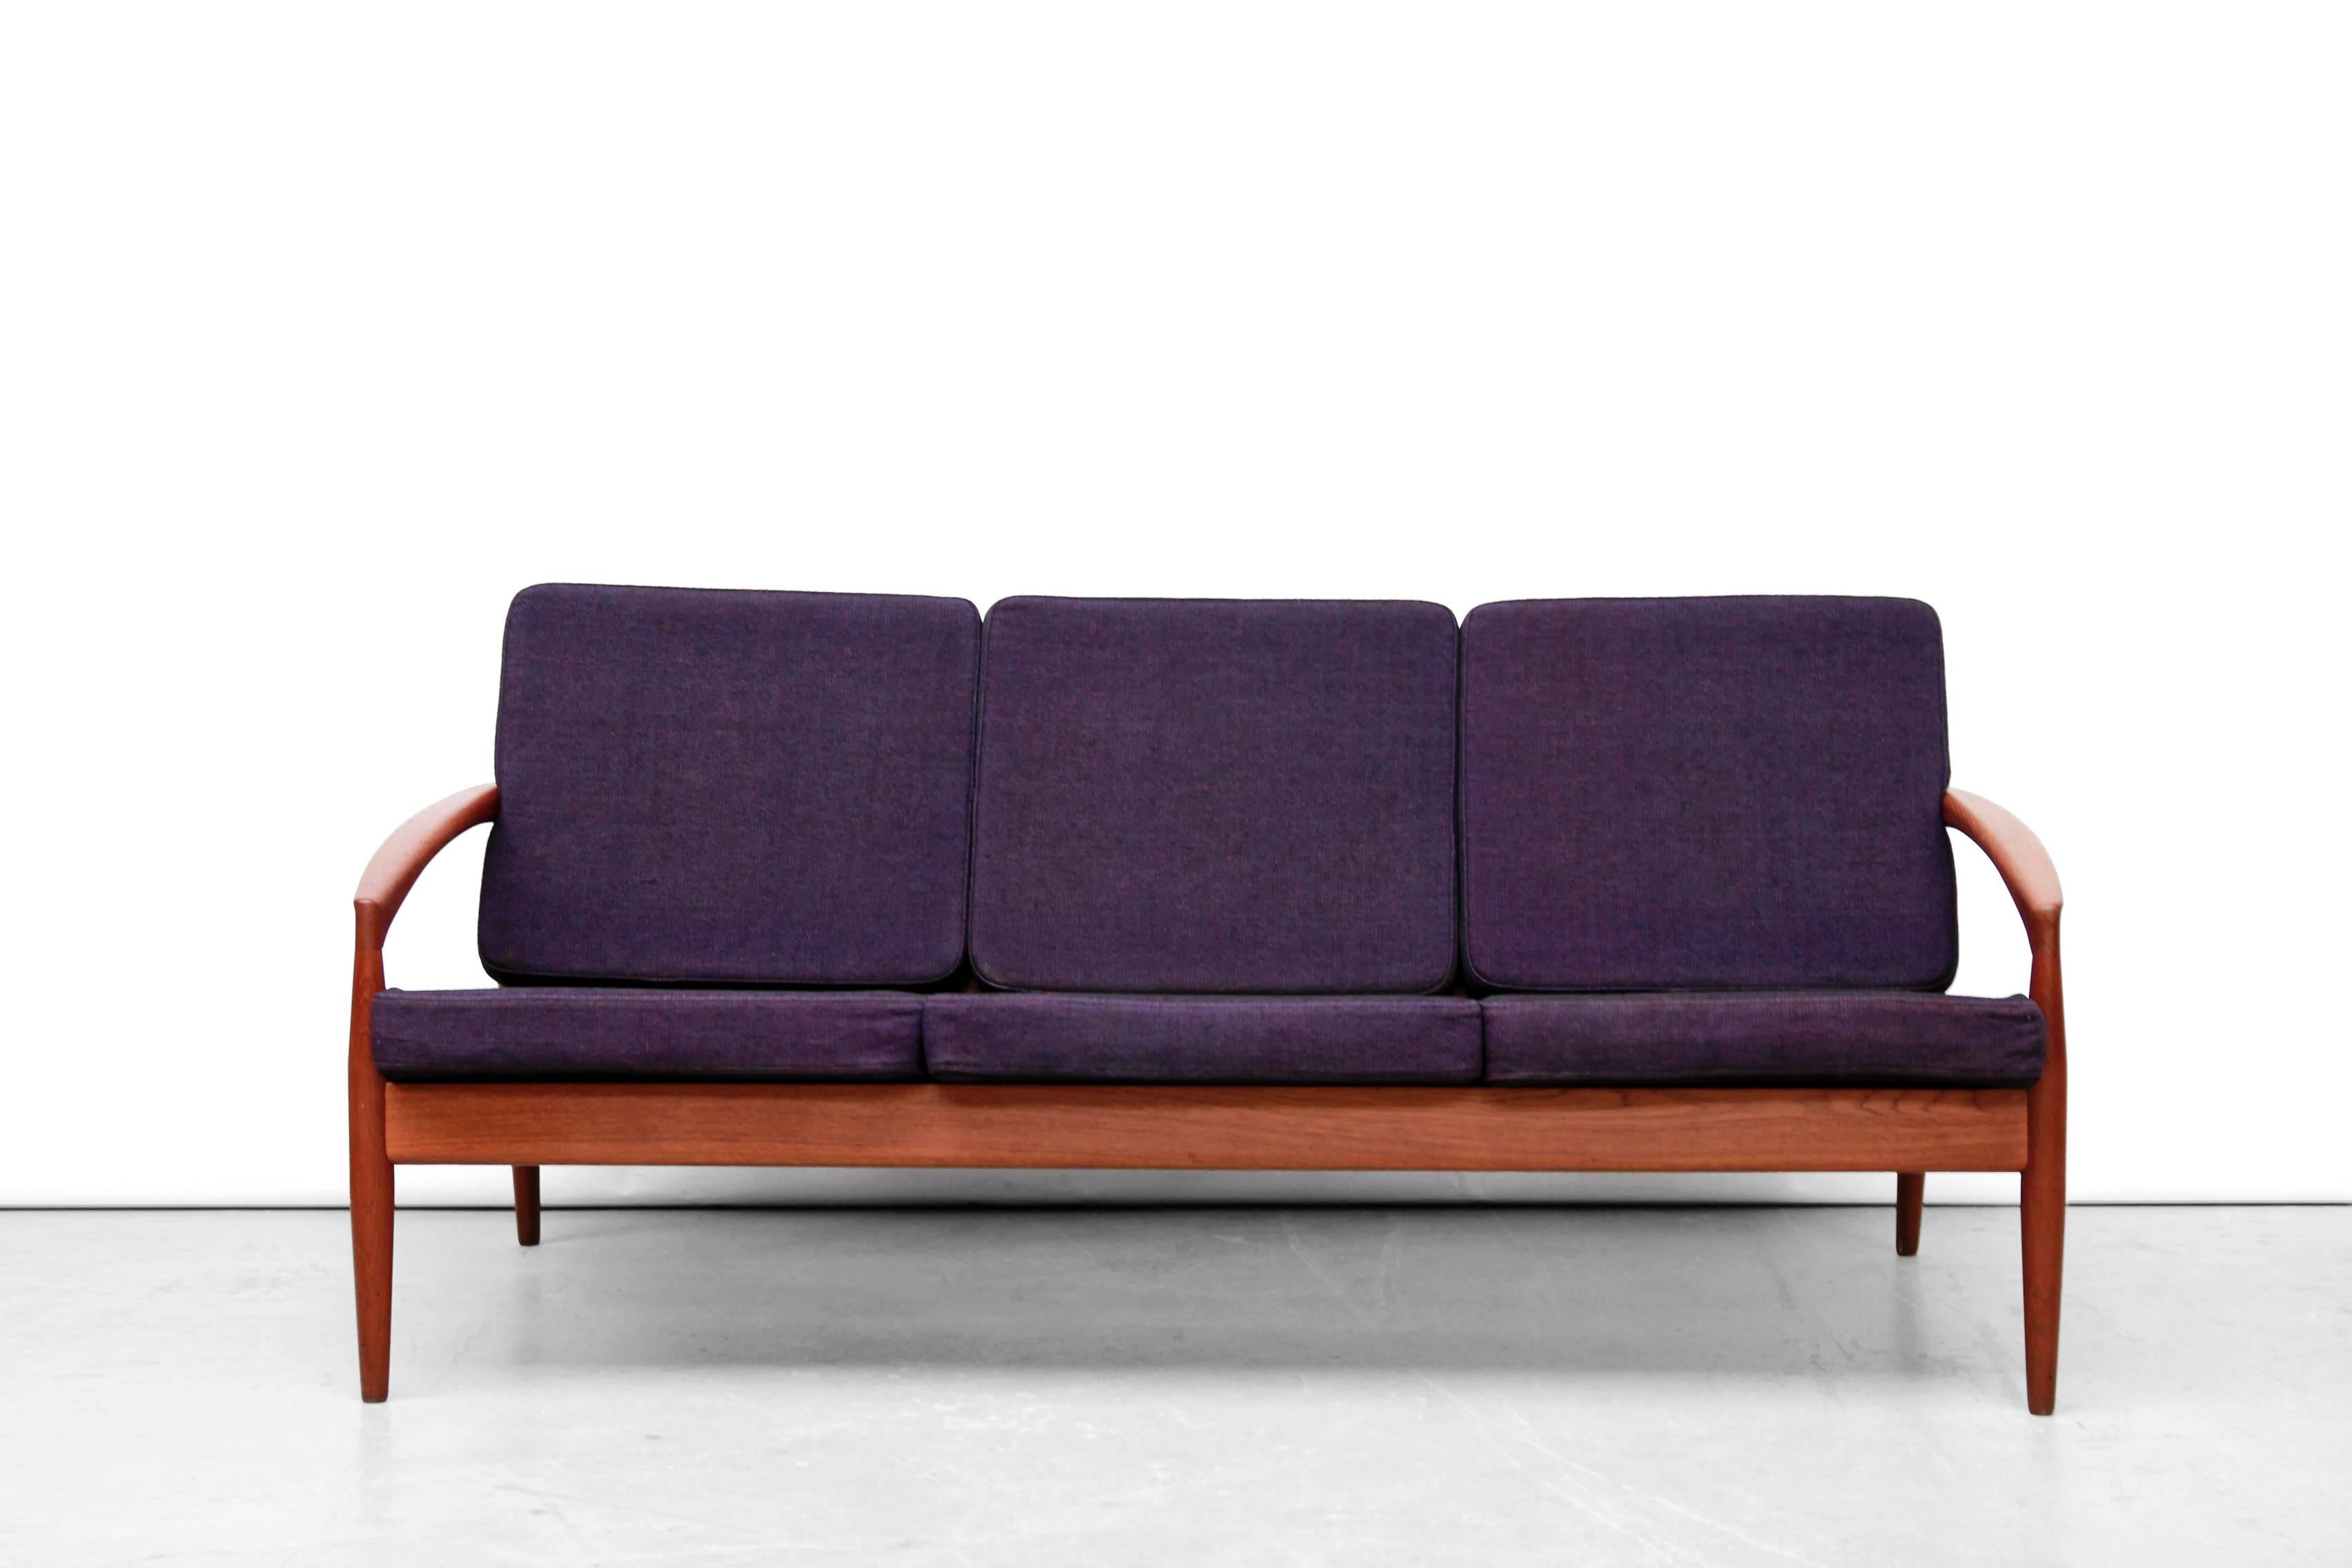 Beautiful sofa by Kai Kristiansen for Magnus Olesen, Denmark. This three-seat, model 121 (also called: paper knife), is made of solid teakwood and is of superb quality. Great clean lines and amazing details. The sofa cushions have new foam, but the